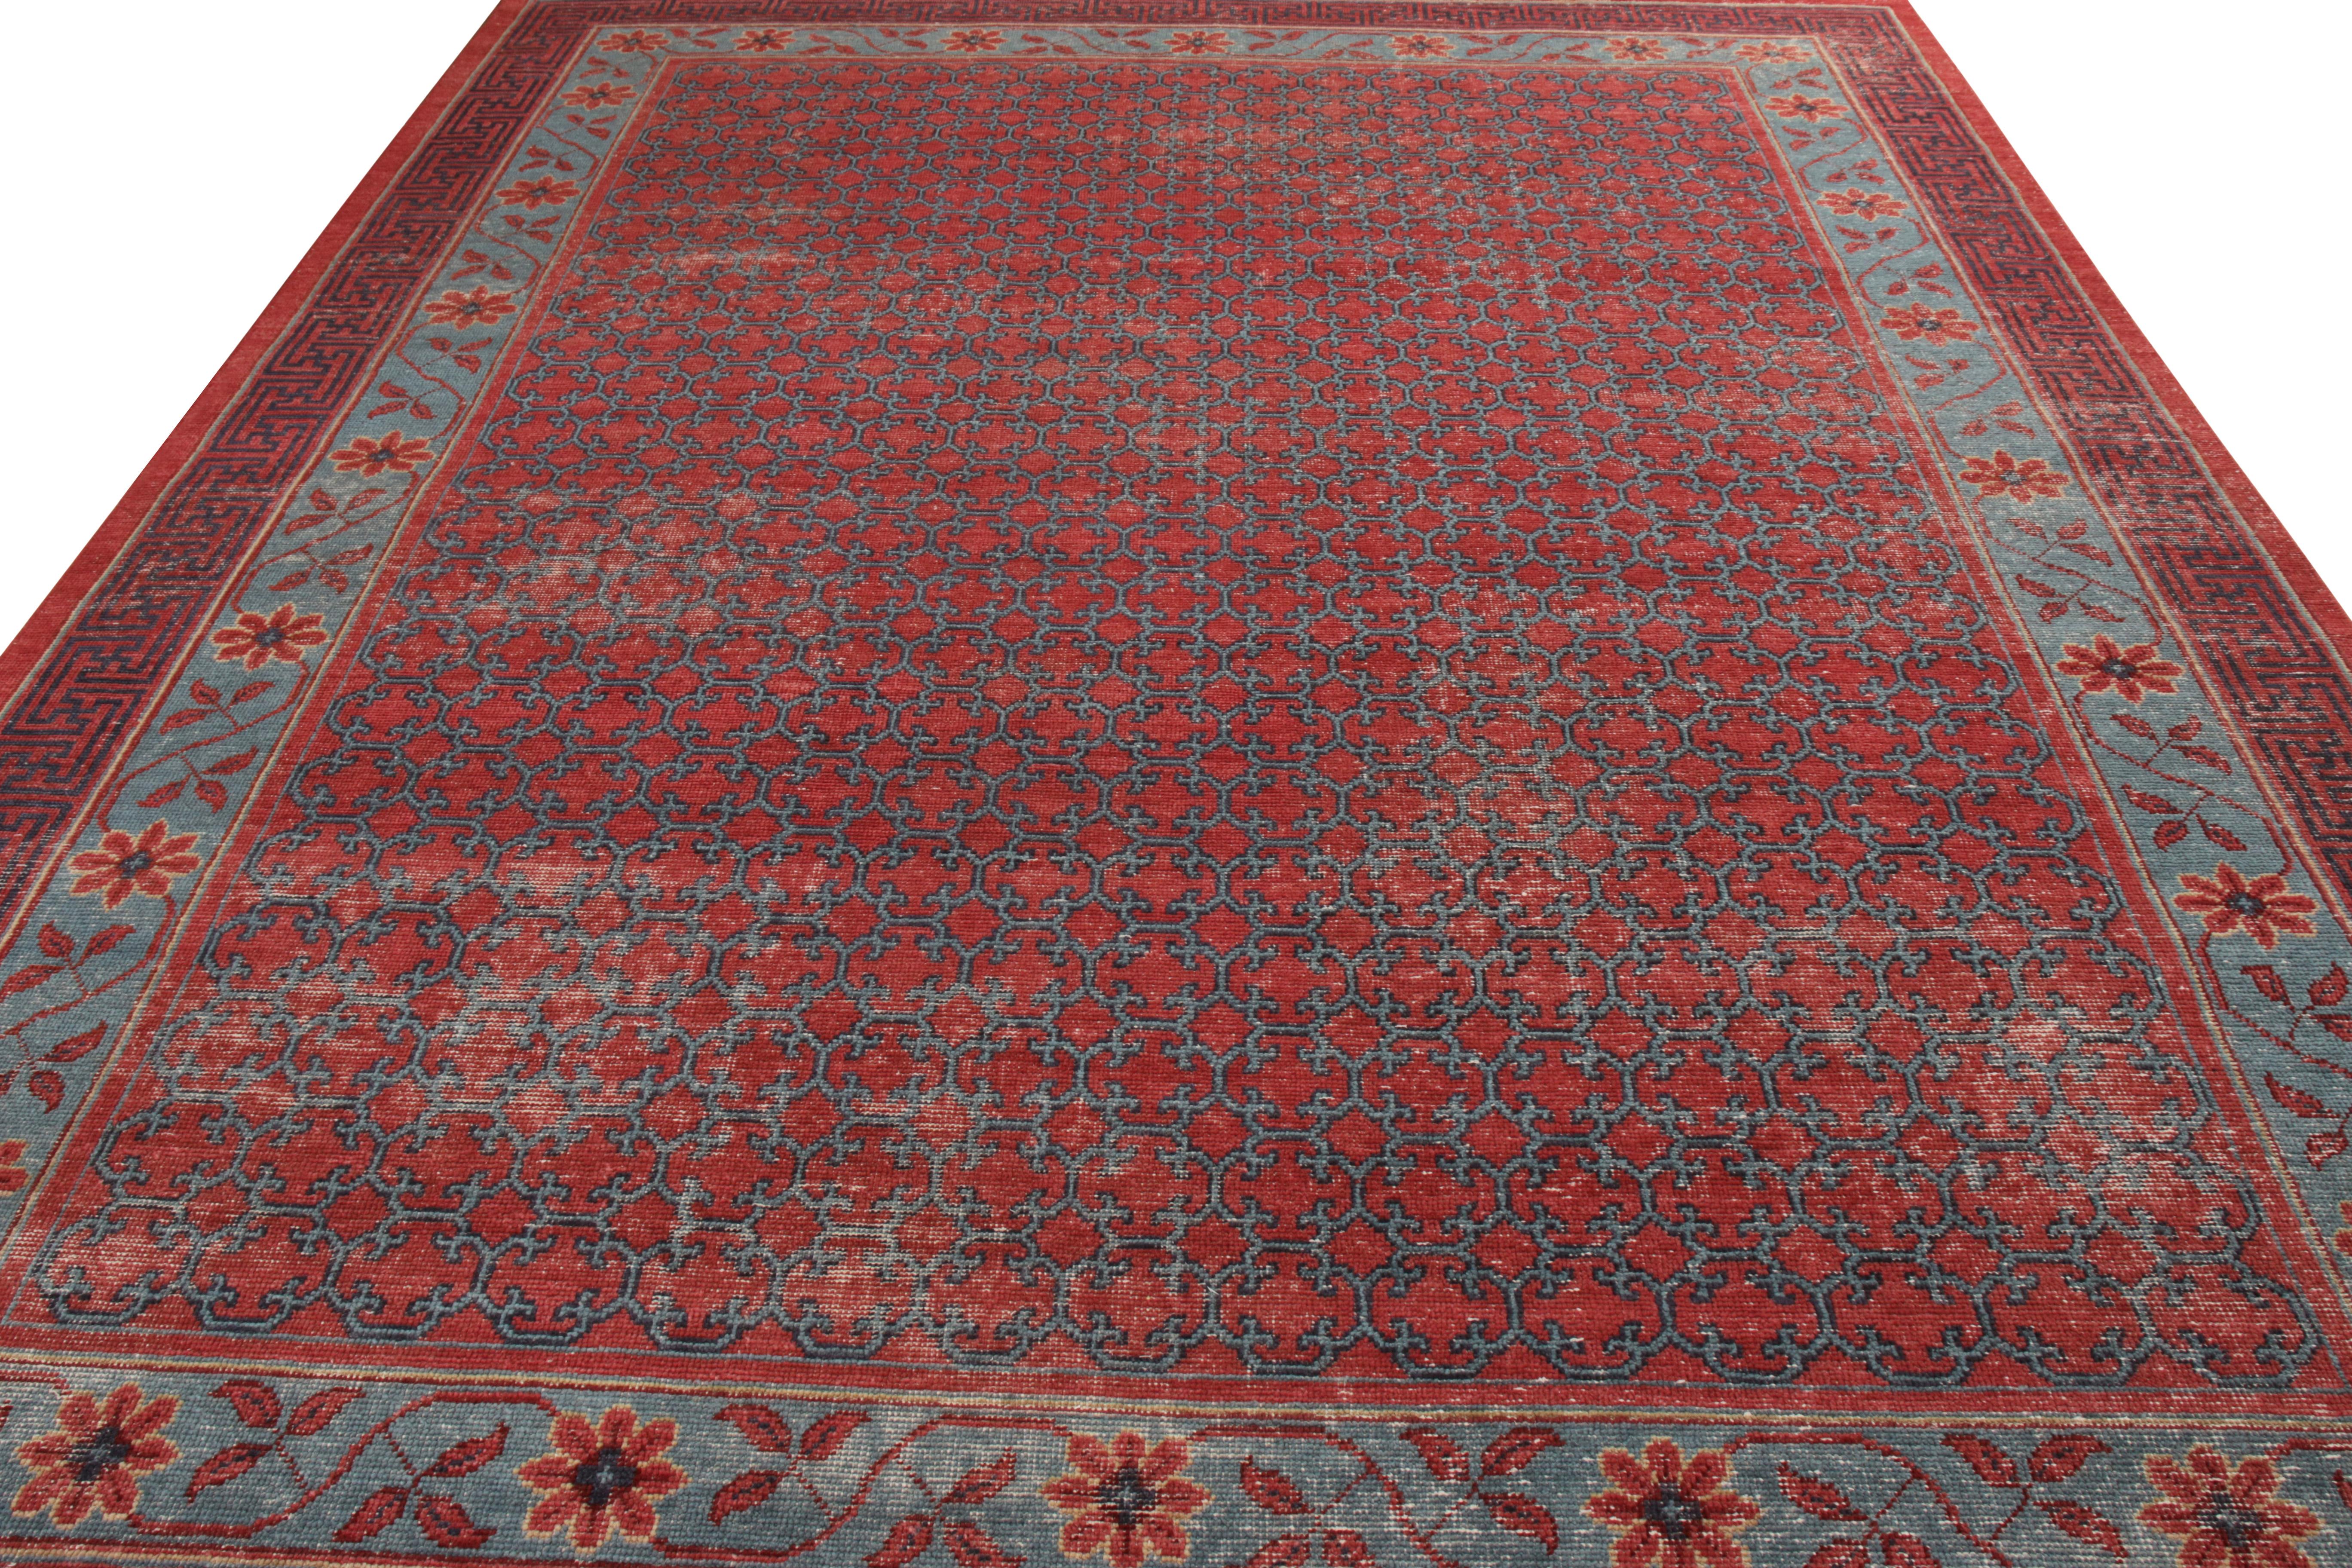 A 9x12 ode to celebrated Khotan rug styles from the classic selections in Rug & Kilim’s Homage Collection. Hand knotted in wool with a shabby-chic, distressed texture, enjoying complementary blue and velvet red hues. Further sporting a sophisticated